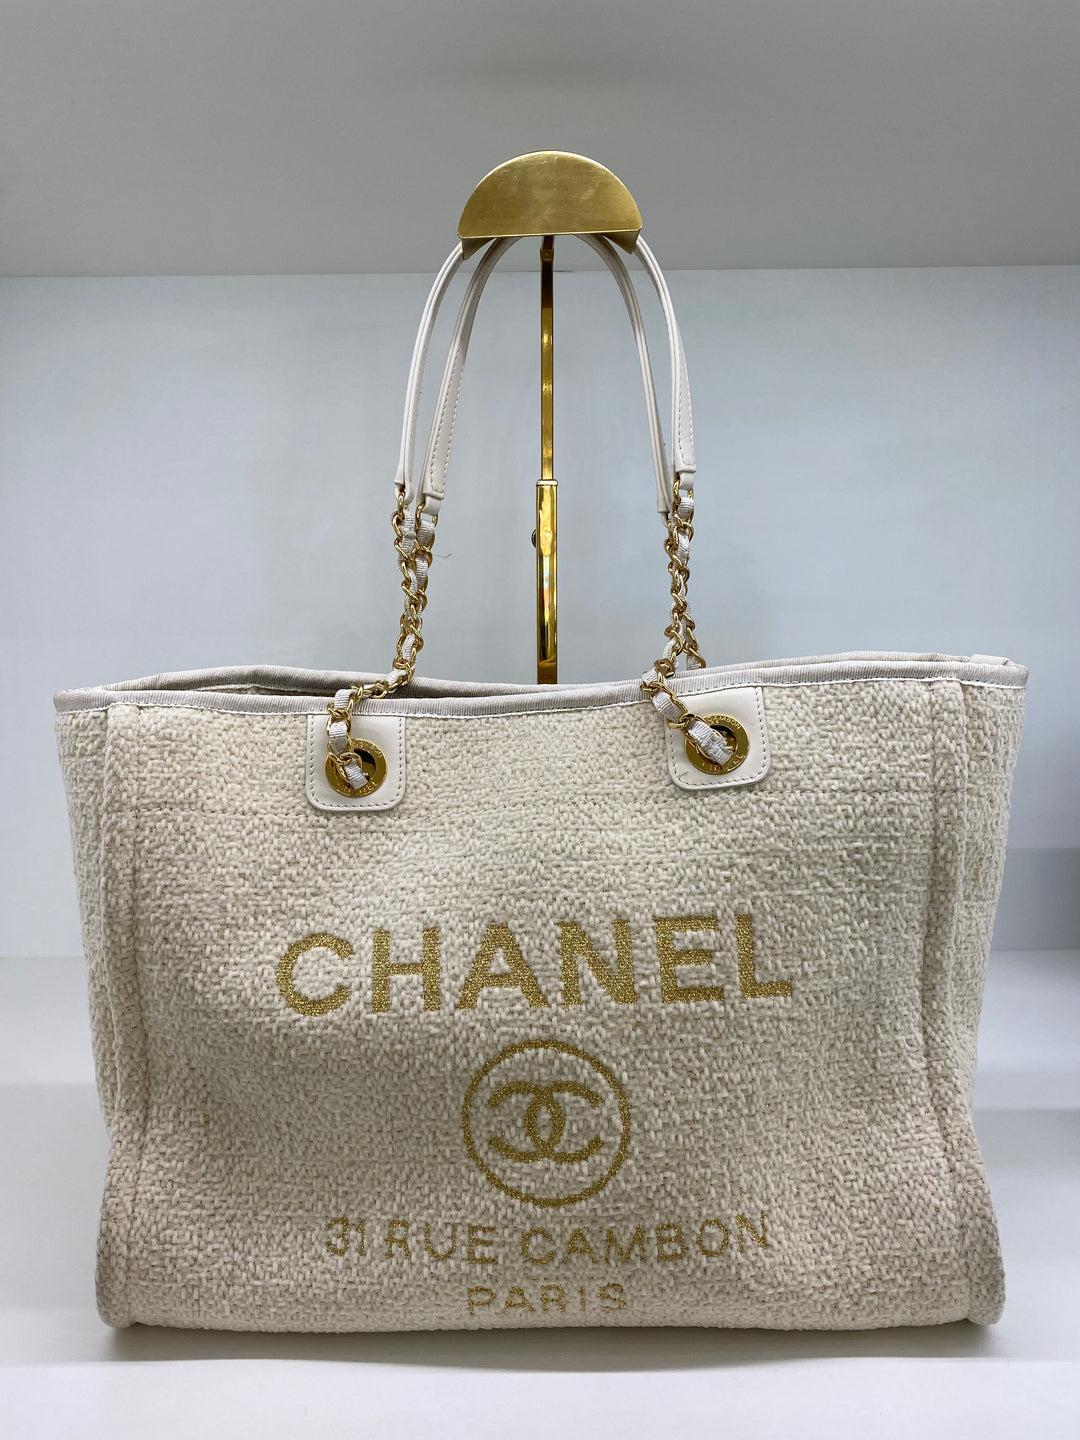 Chanel Deauville from the 19A Collection. Crafted in beautiful beige boucle (similar to tweed) with gold lurex threading throughout giving a sparkle all around the bag. Gold Chanel logo, gold hardware and elegant burgundy lining. 

Condition: Great